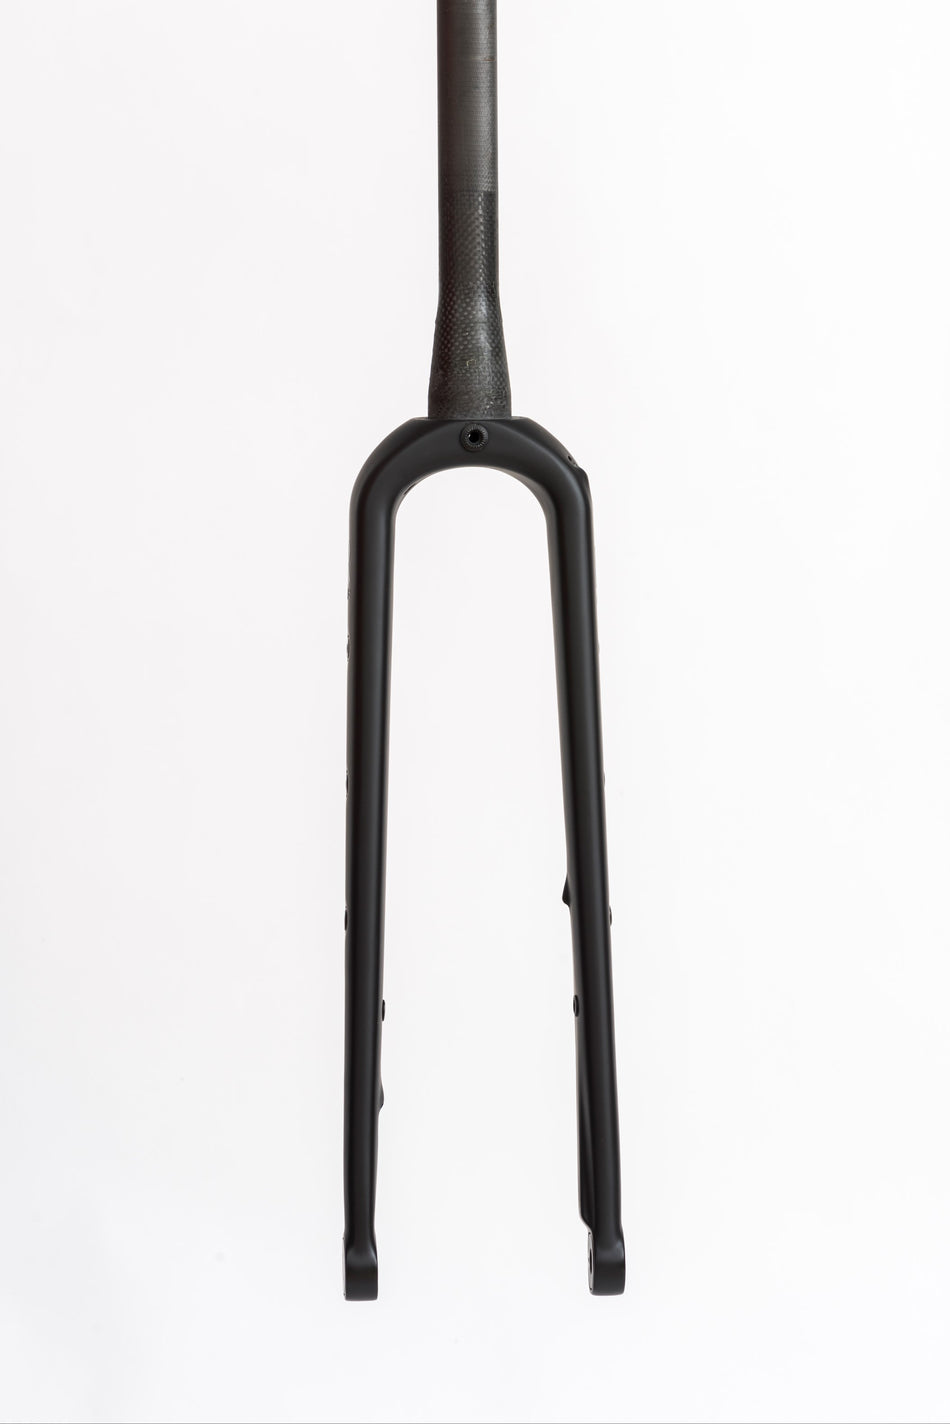 Reilly carbon adventure fork side on against white background